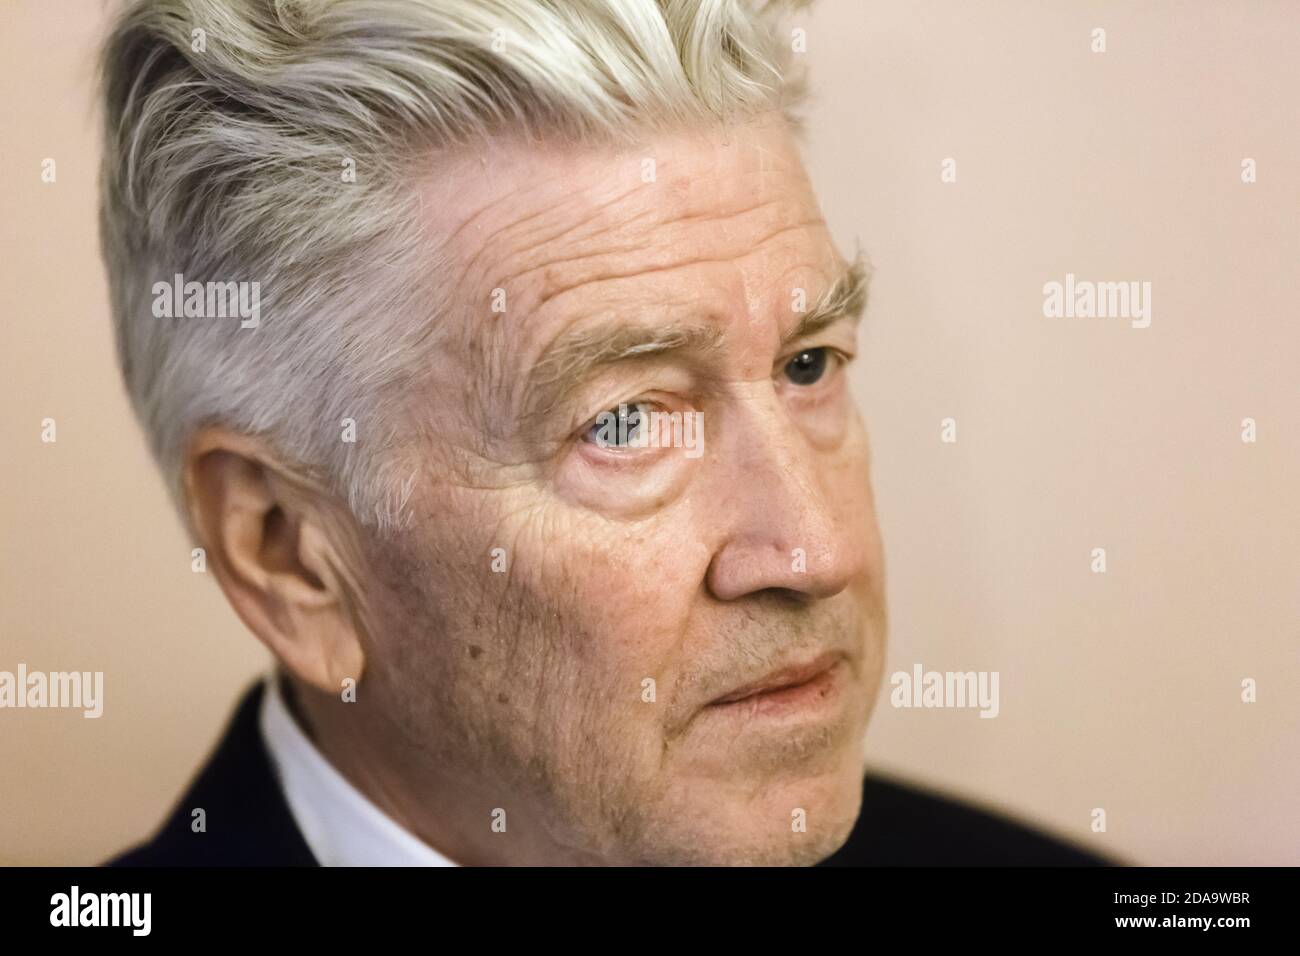 KIEV, UKRAINE - Nov. 18, 2017: Meeting with legendary American film director, screenwriter, producer and actor David Lynch who arrived in Ukraine to o Stock Photo